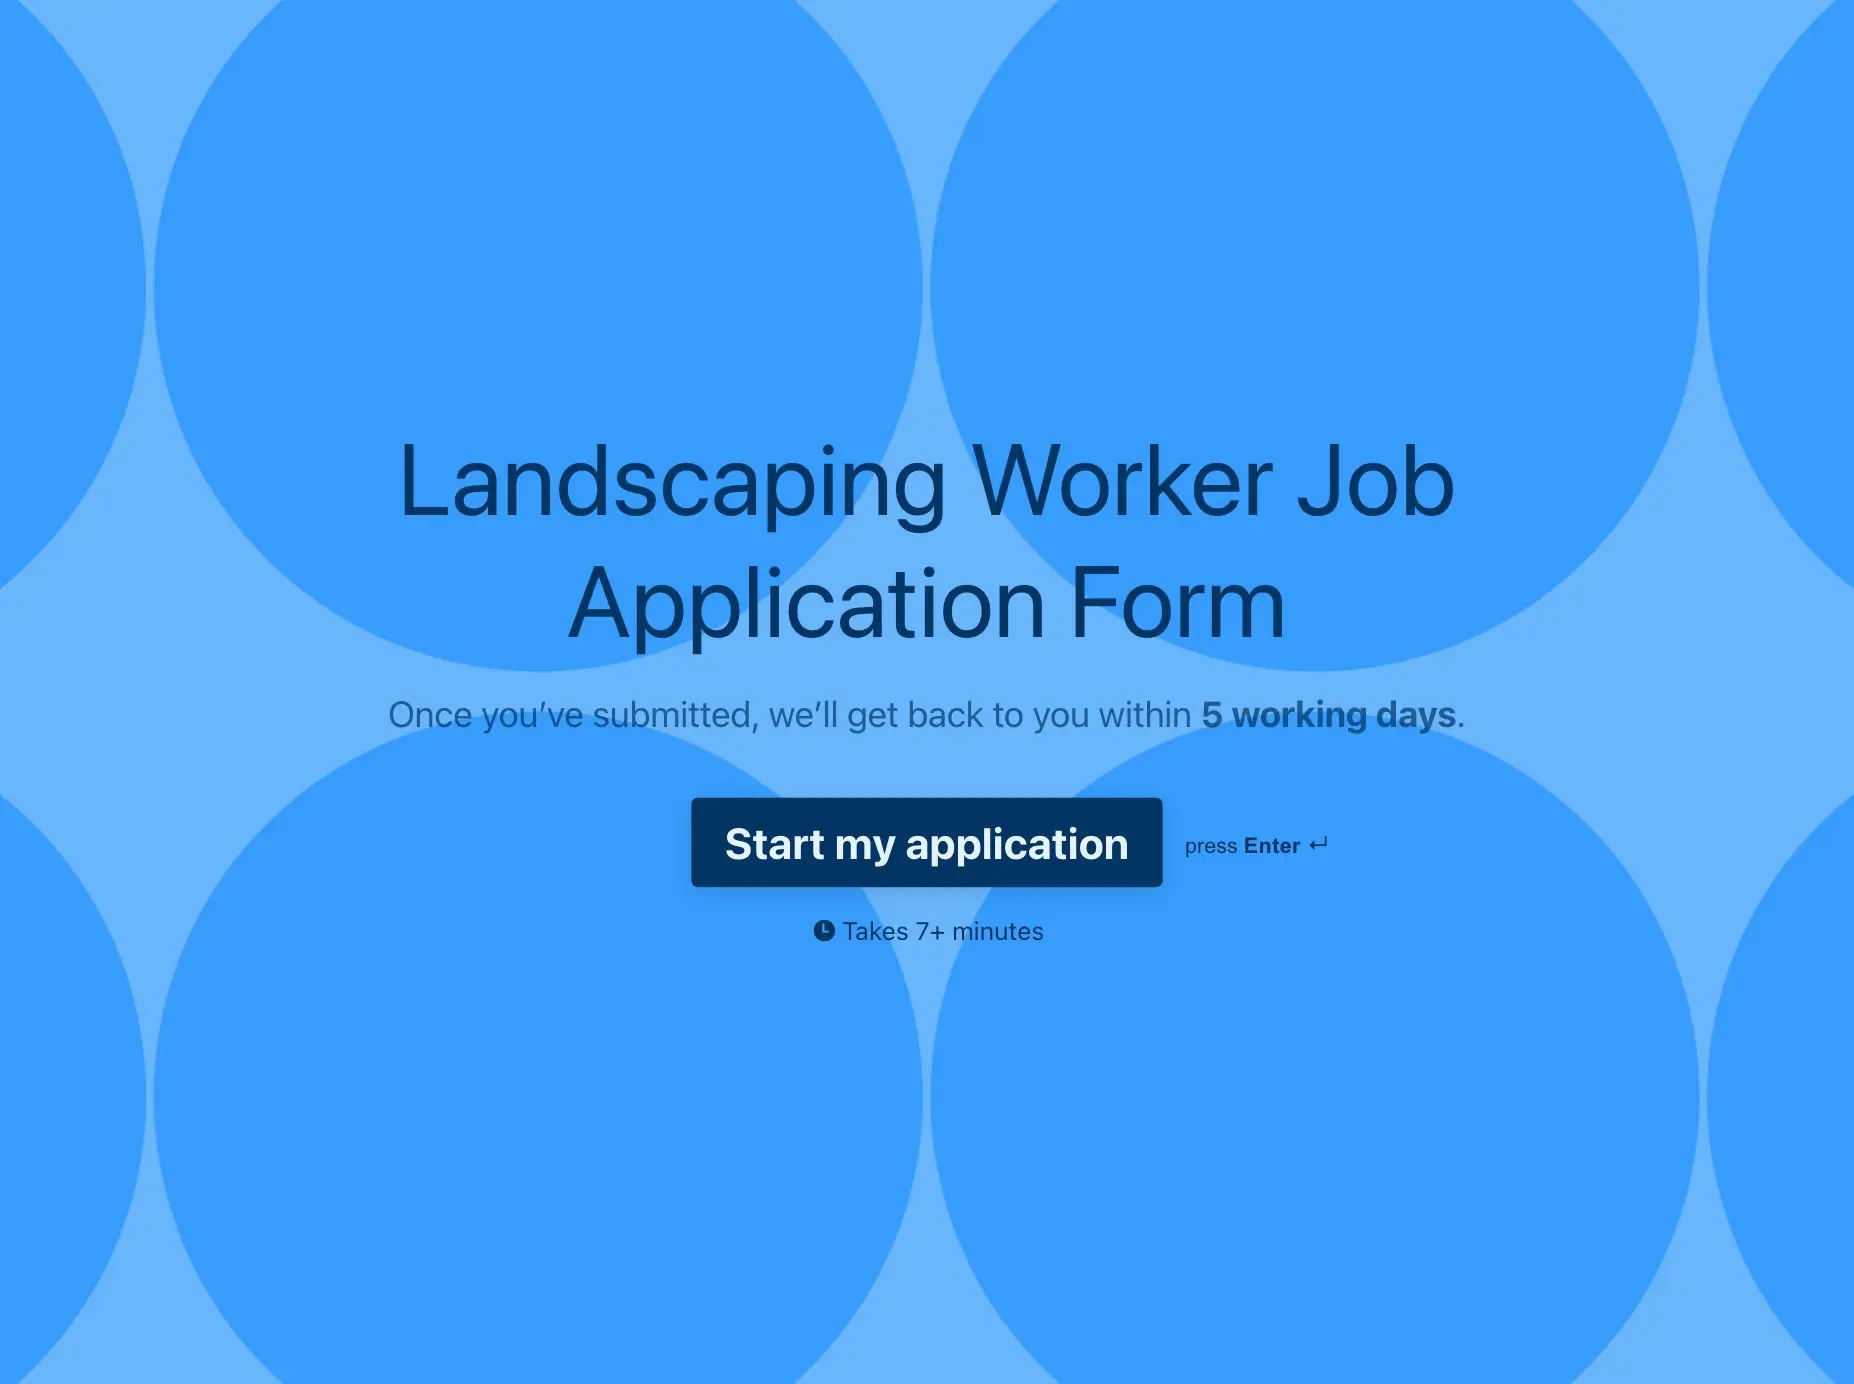 Landscaping Worker Job Application Form Template Hero